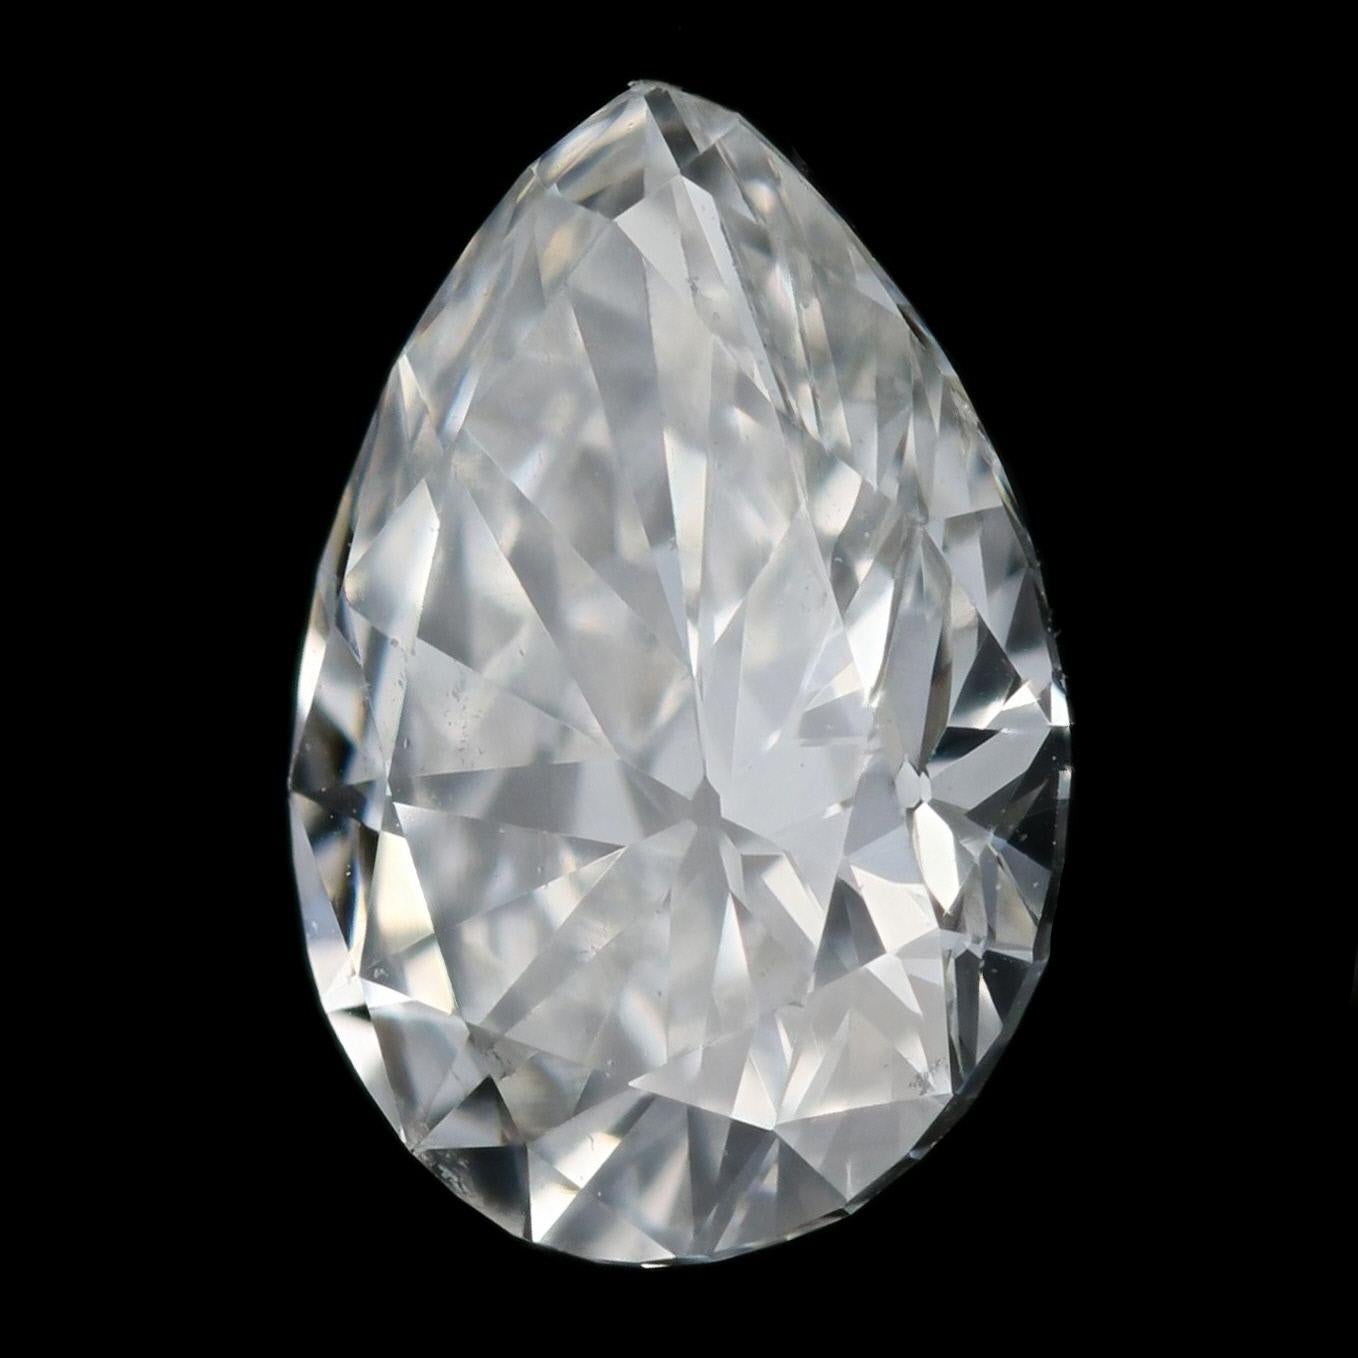 Weight: .59ct
Cut: Pear 
Color: G   
Clarity: VS1 
Dimensions (mm): 6.91 x 4.88 x 2.78 

GIA Report Number: 2215185144 

Condition: New  

Please check out the enlarged pictures.

Thank you for taking the time to read our description. If you have